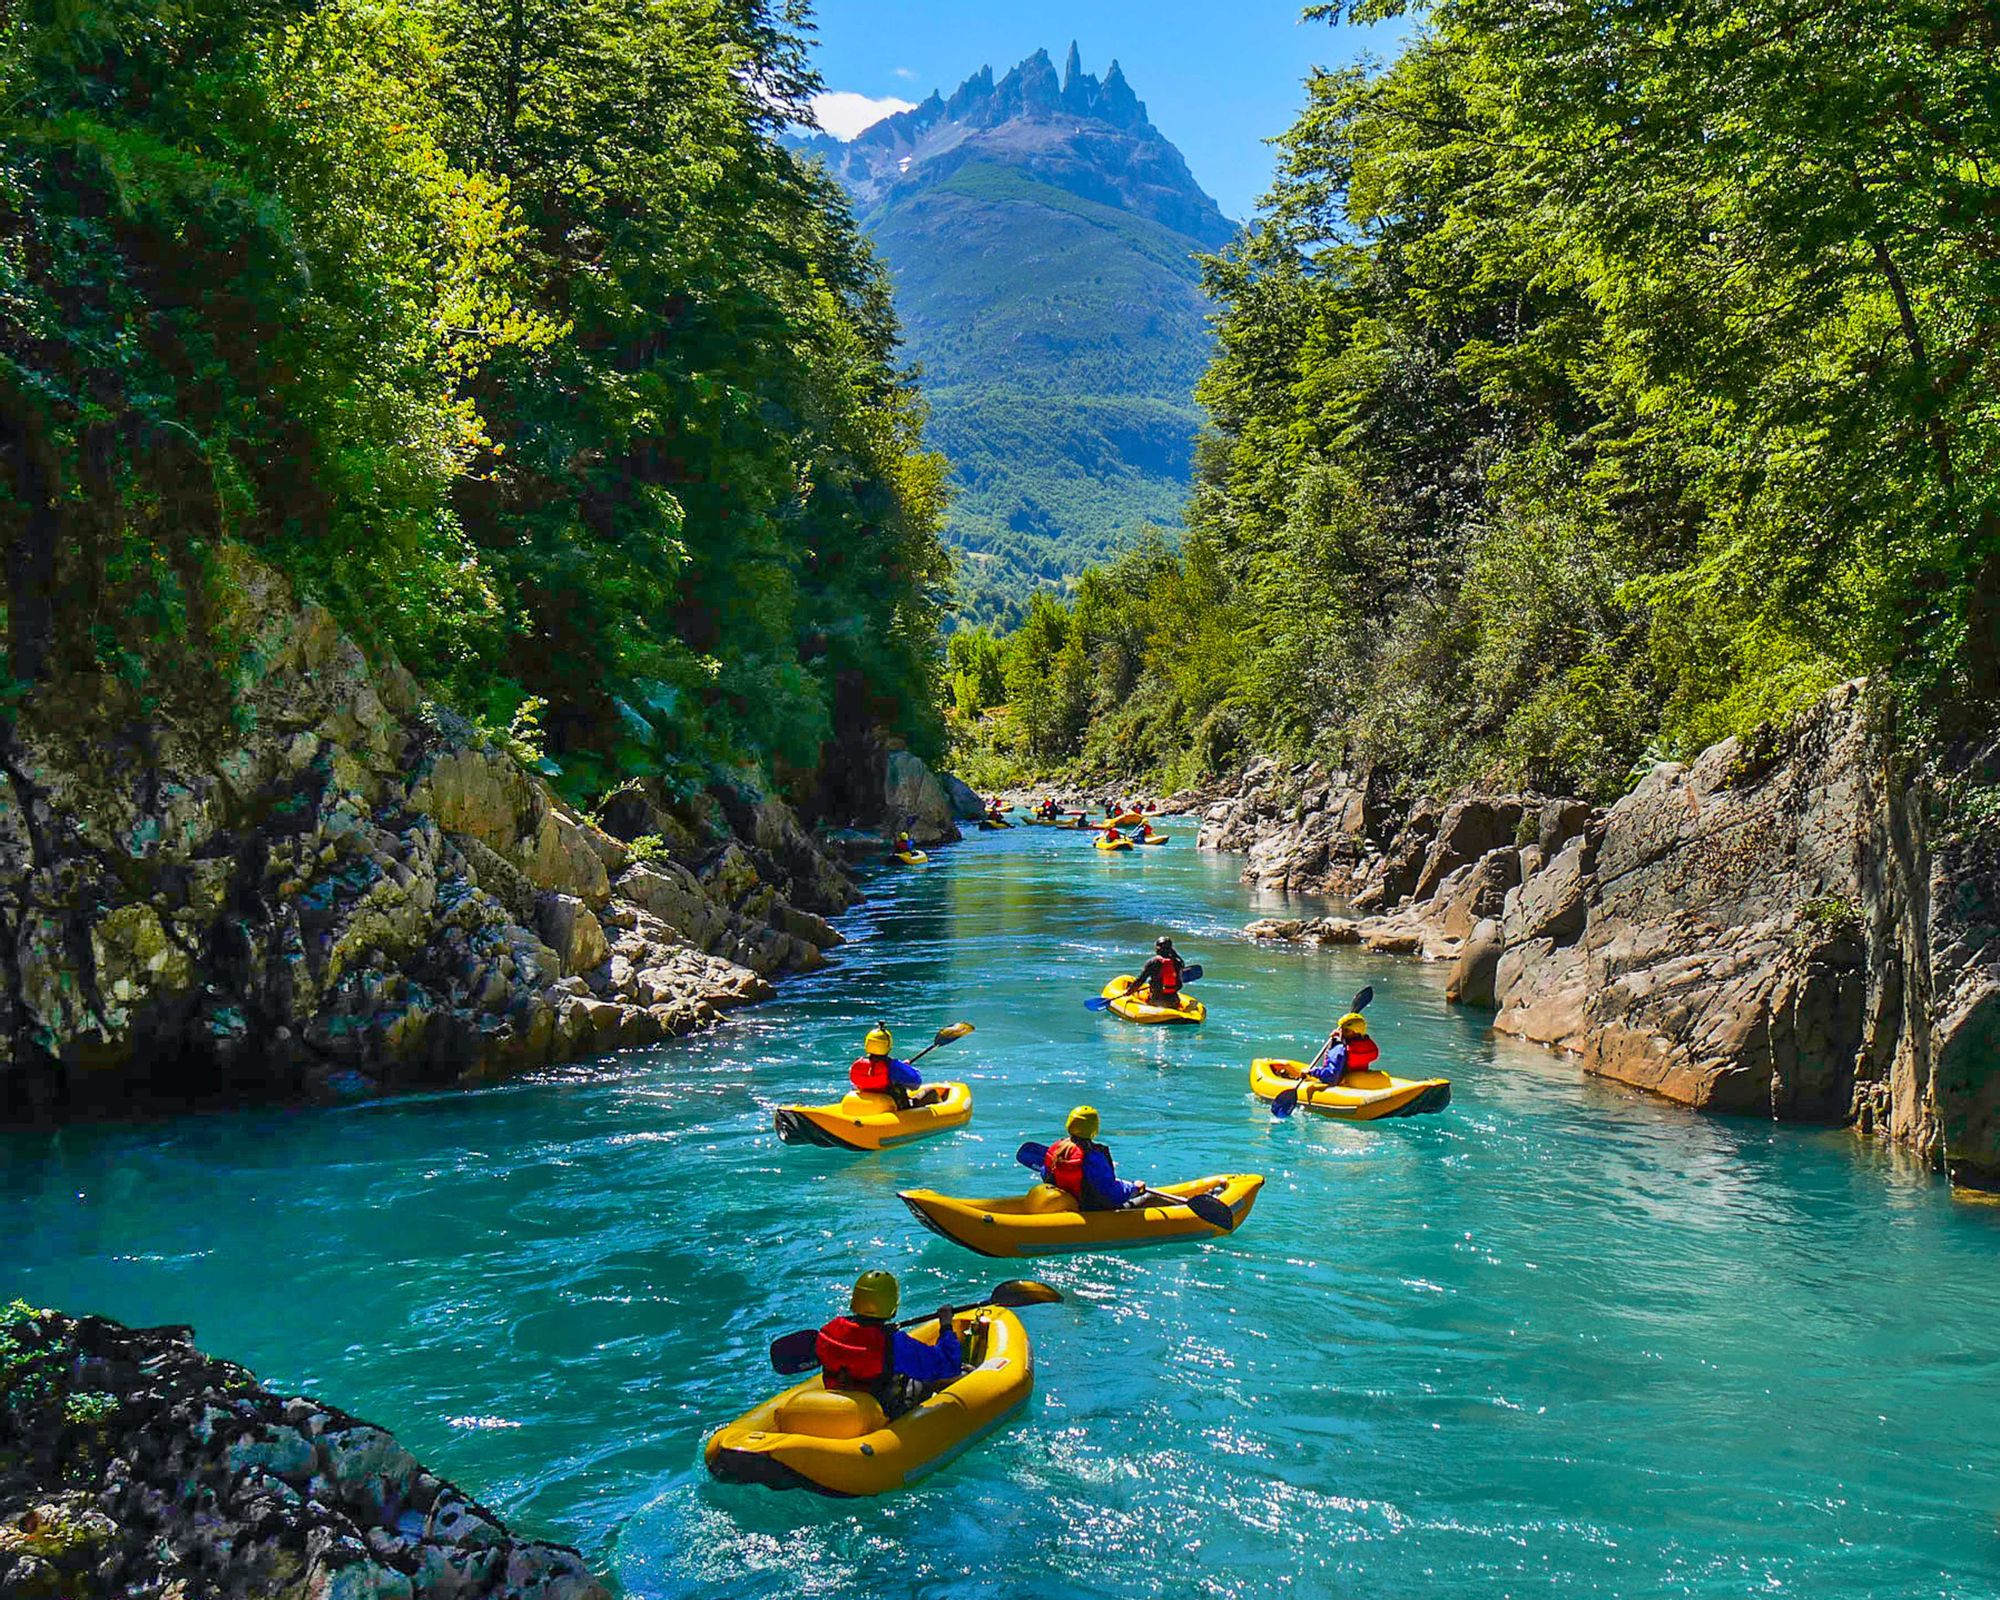 Rafting on a turquoise river in the shadow of the mighty mountains. There are few better sights.